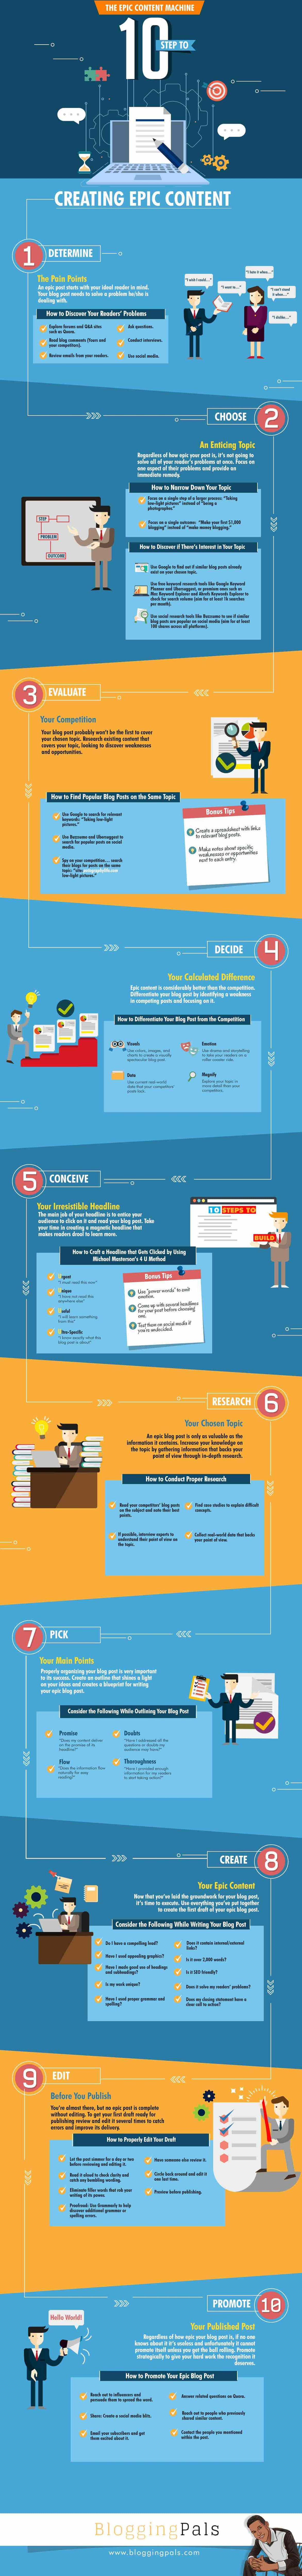 10 Steps to Generating Epic Blog Posts #infographic